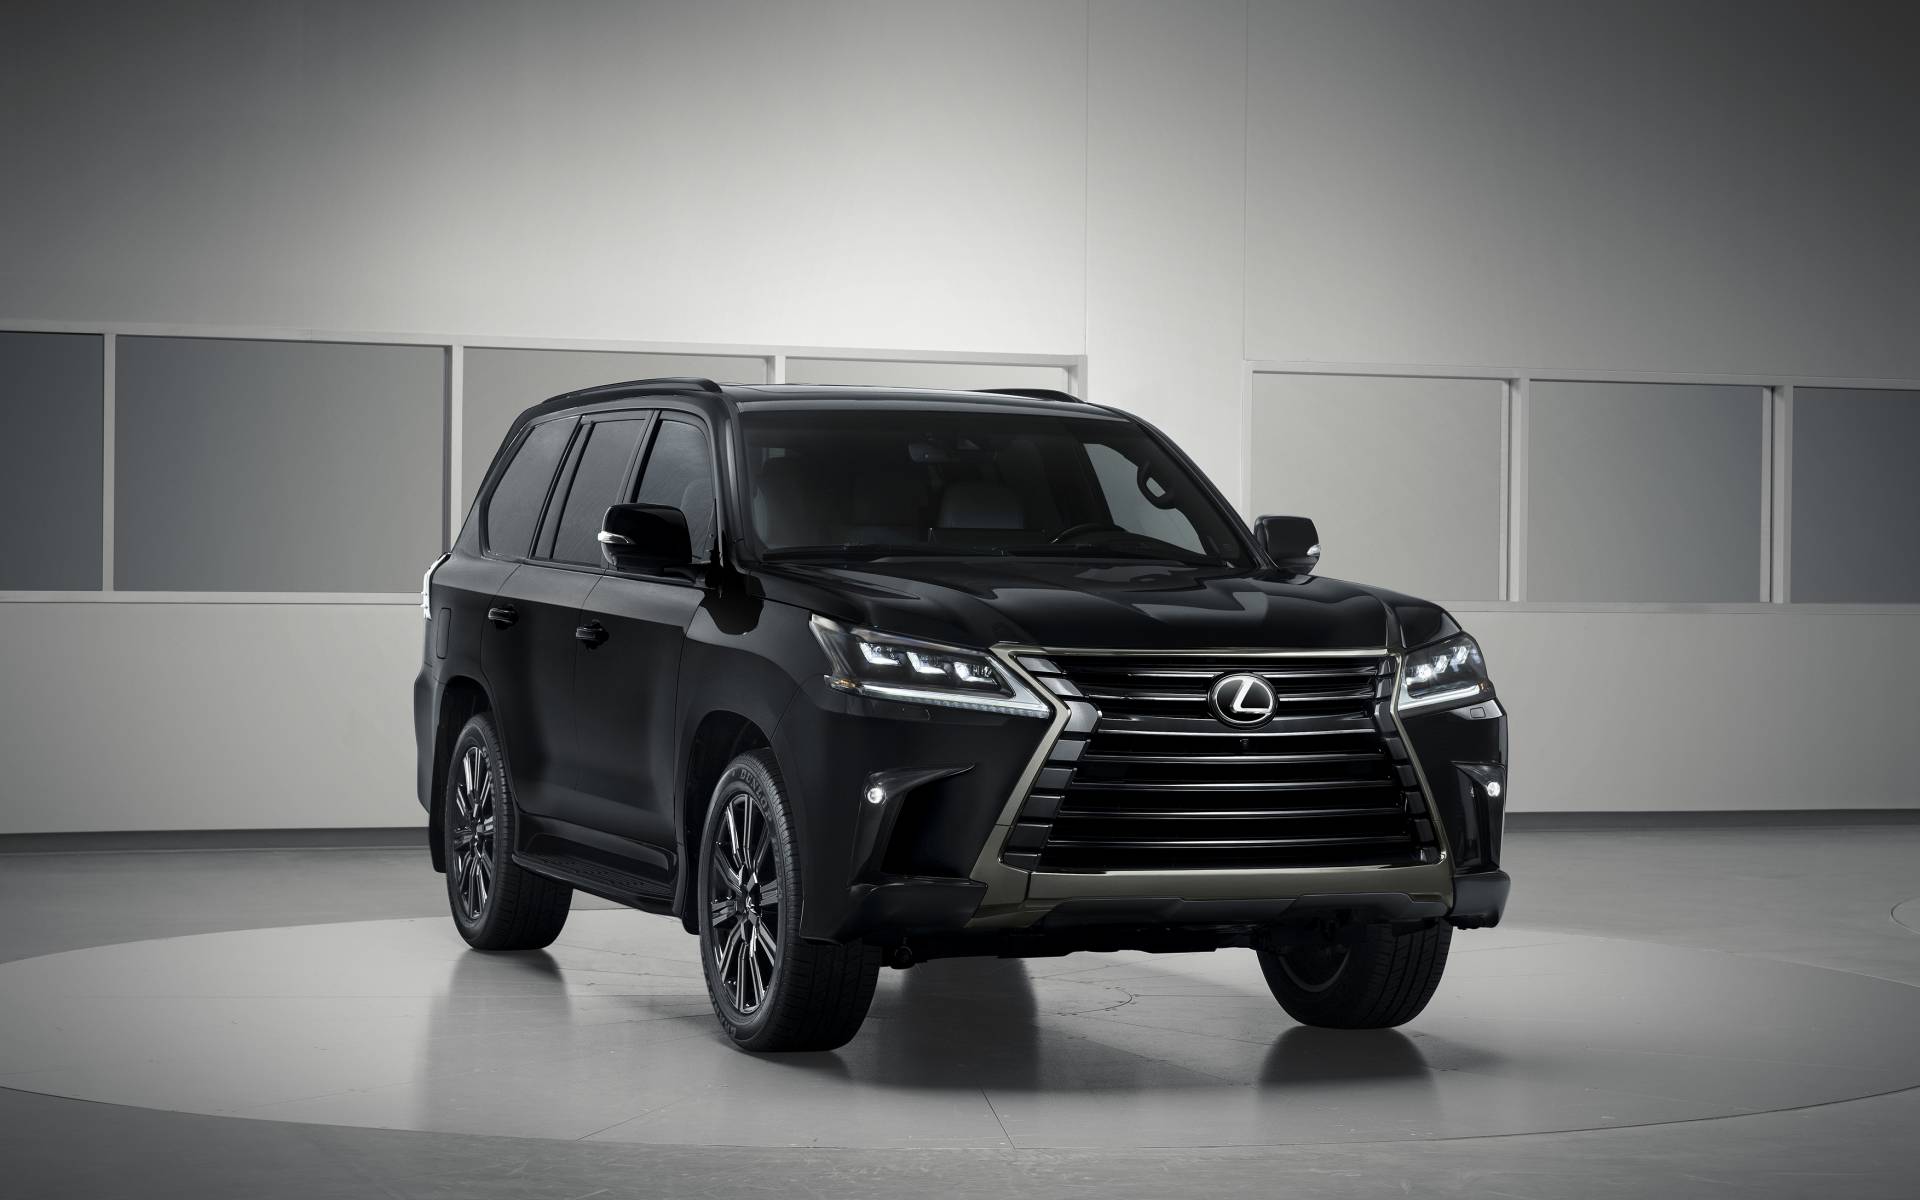 2019 Lexus Lx Lx 570 Specifications The Car Guide